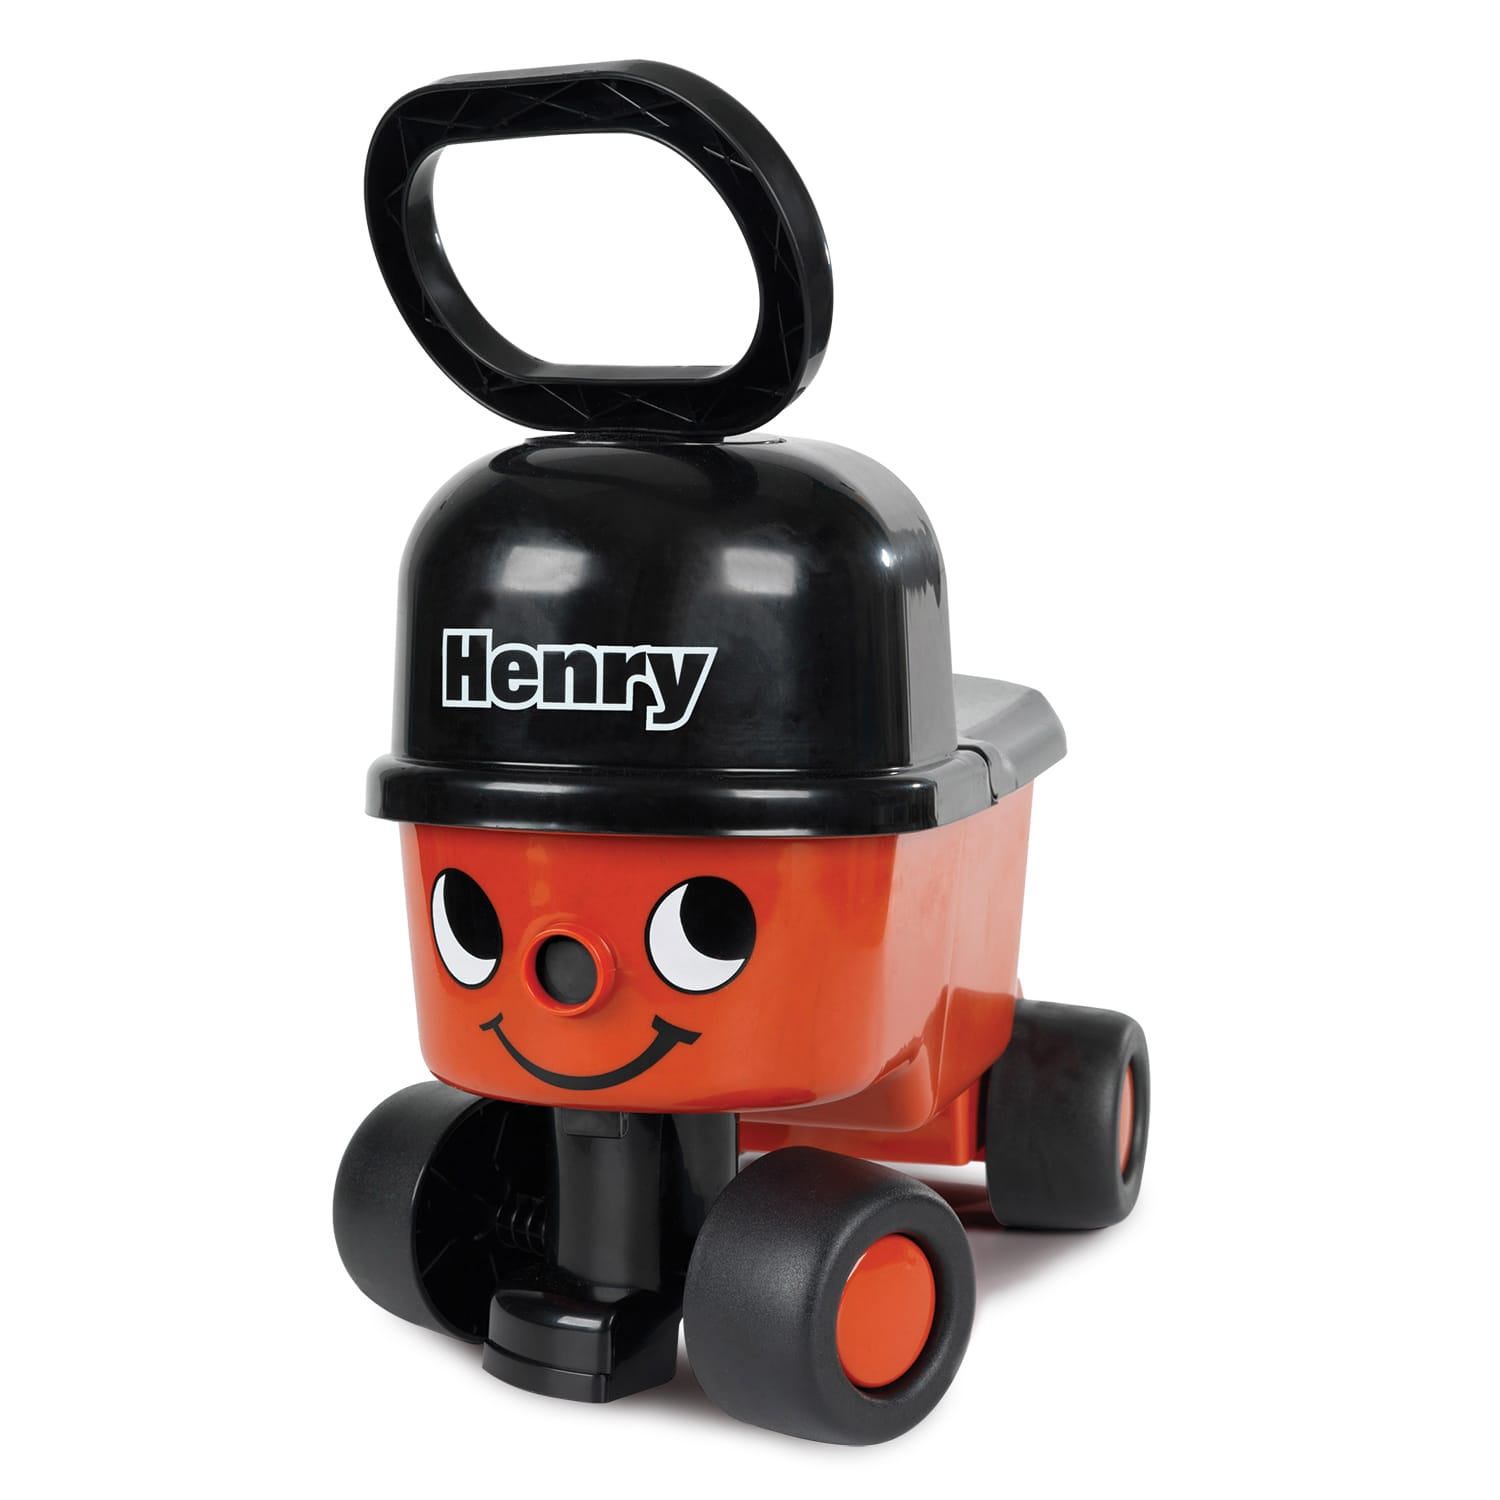 Casdon Henry Red Sit n Ride Hoover Car Vehicle Drive Boys Outdoor Toys Games 